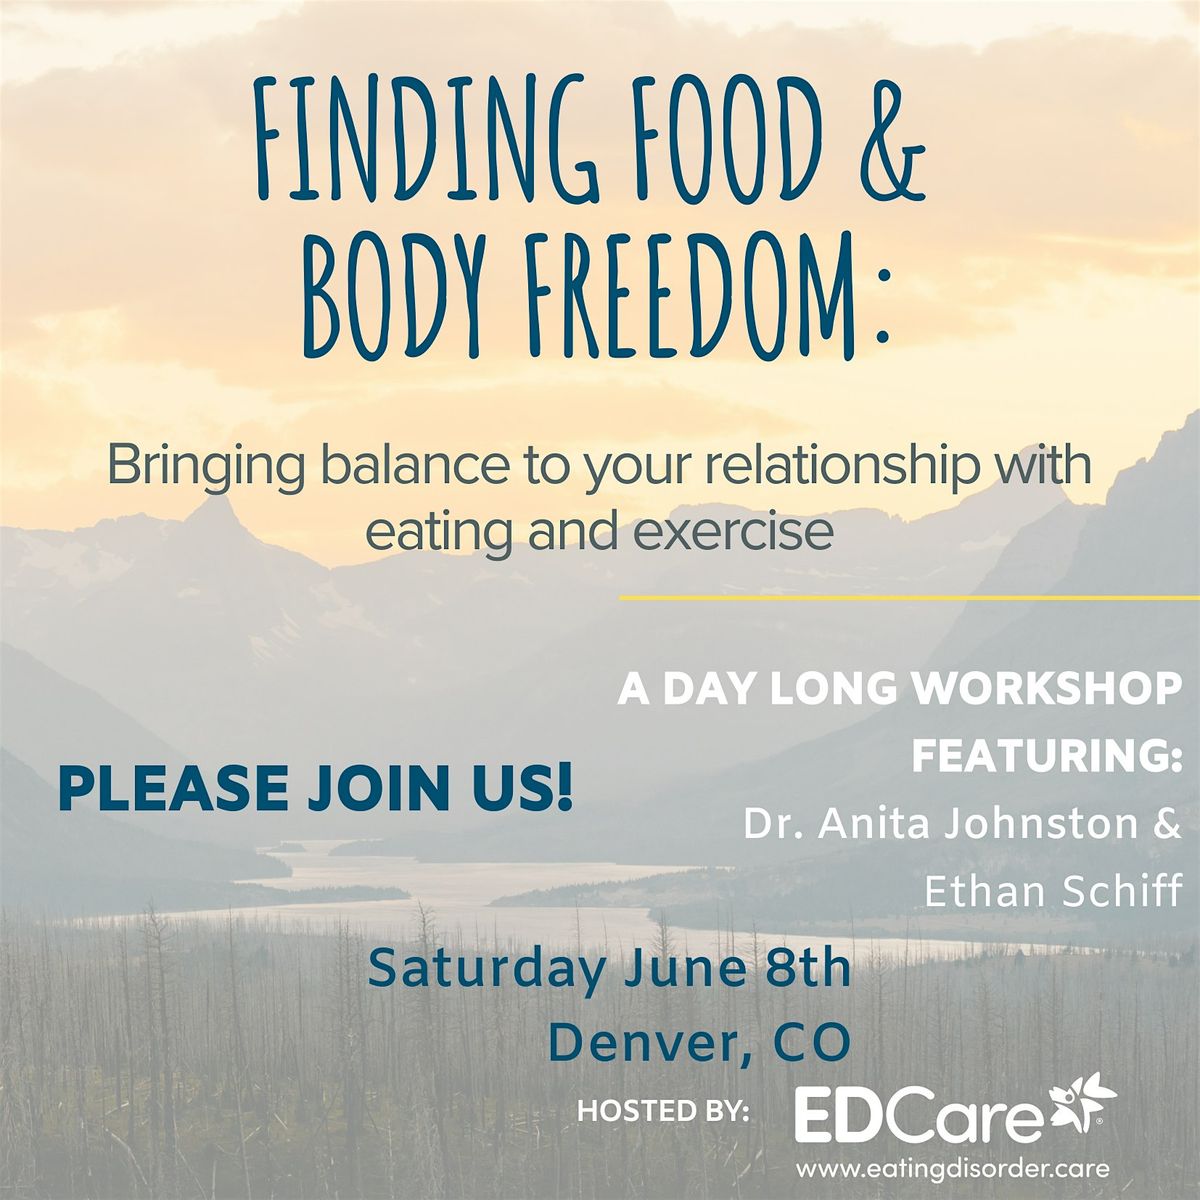 Finding Food & Body Freedom (with Dr. Anita Johnston & Ethan Schiff)